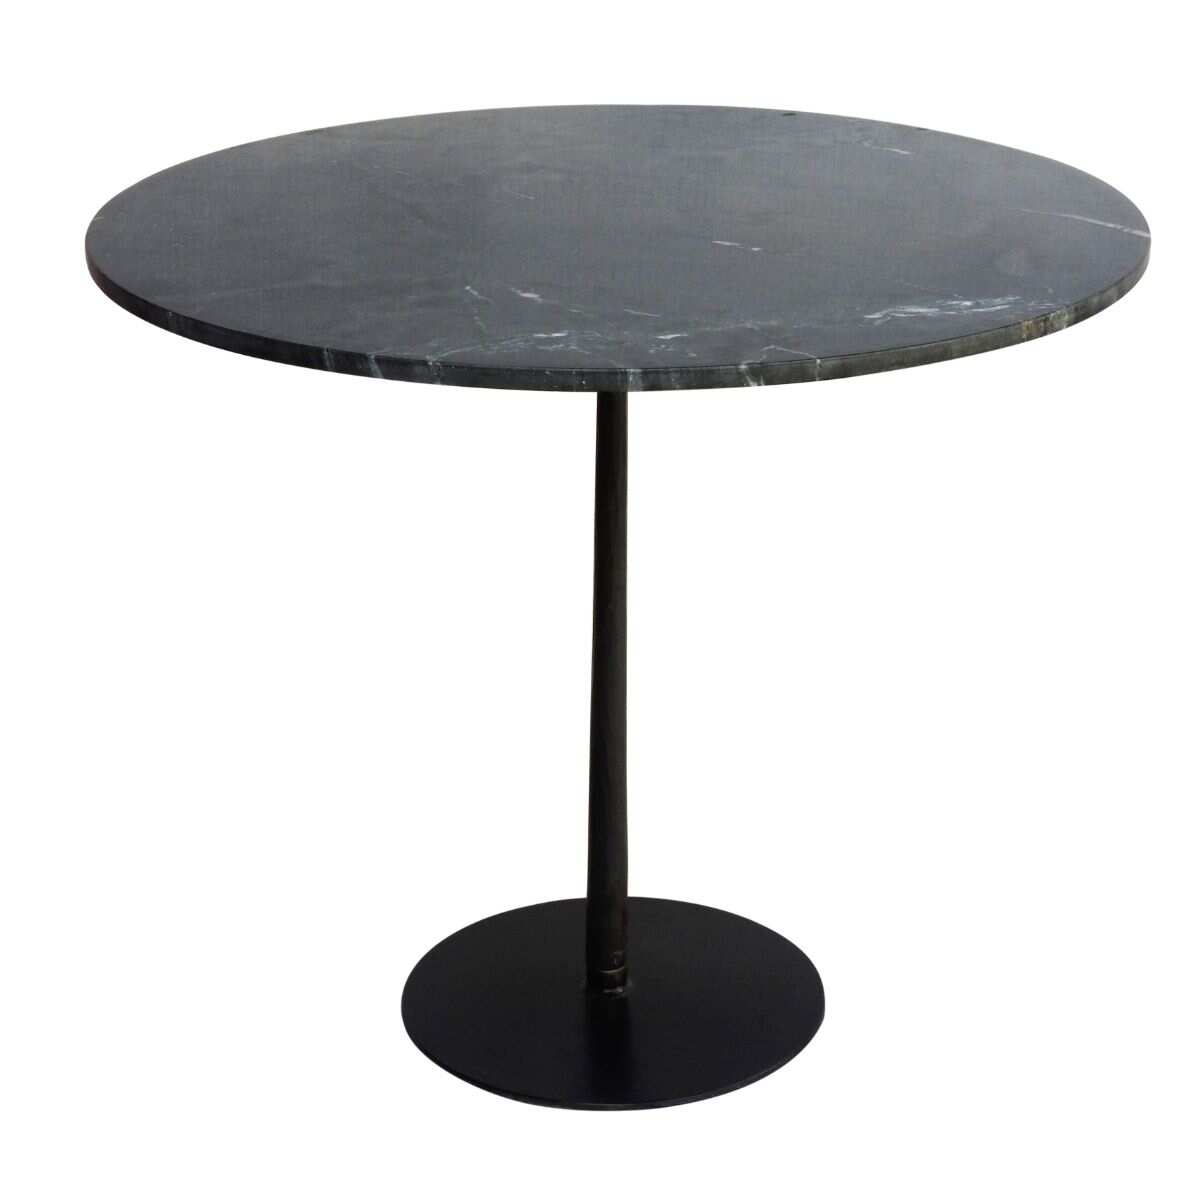 35.5" Black Contemporary Solid Round Dining Table